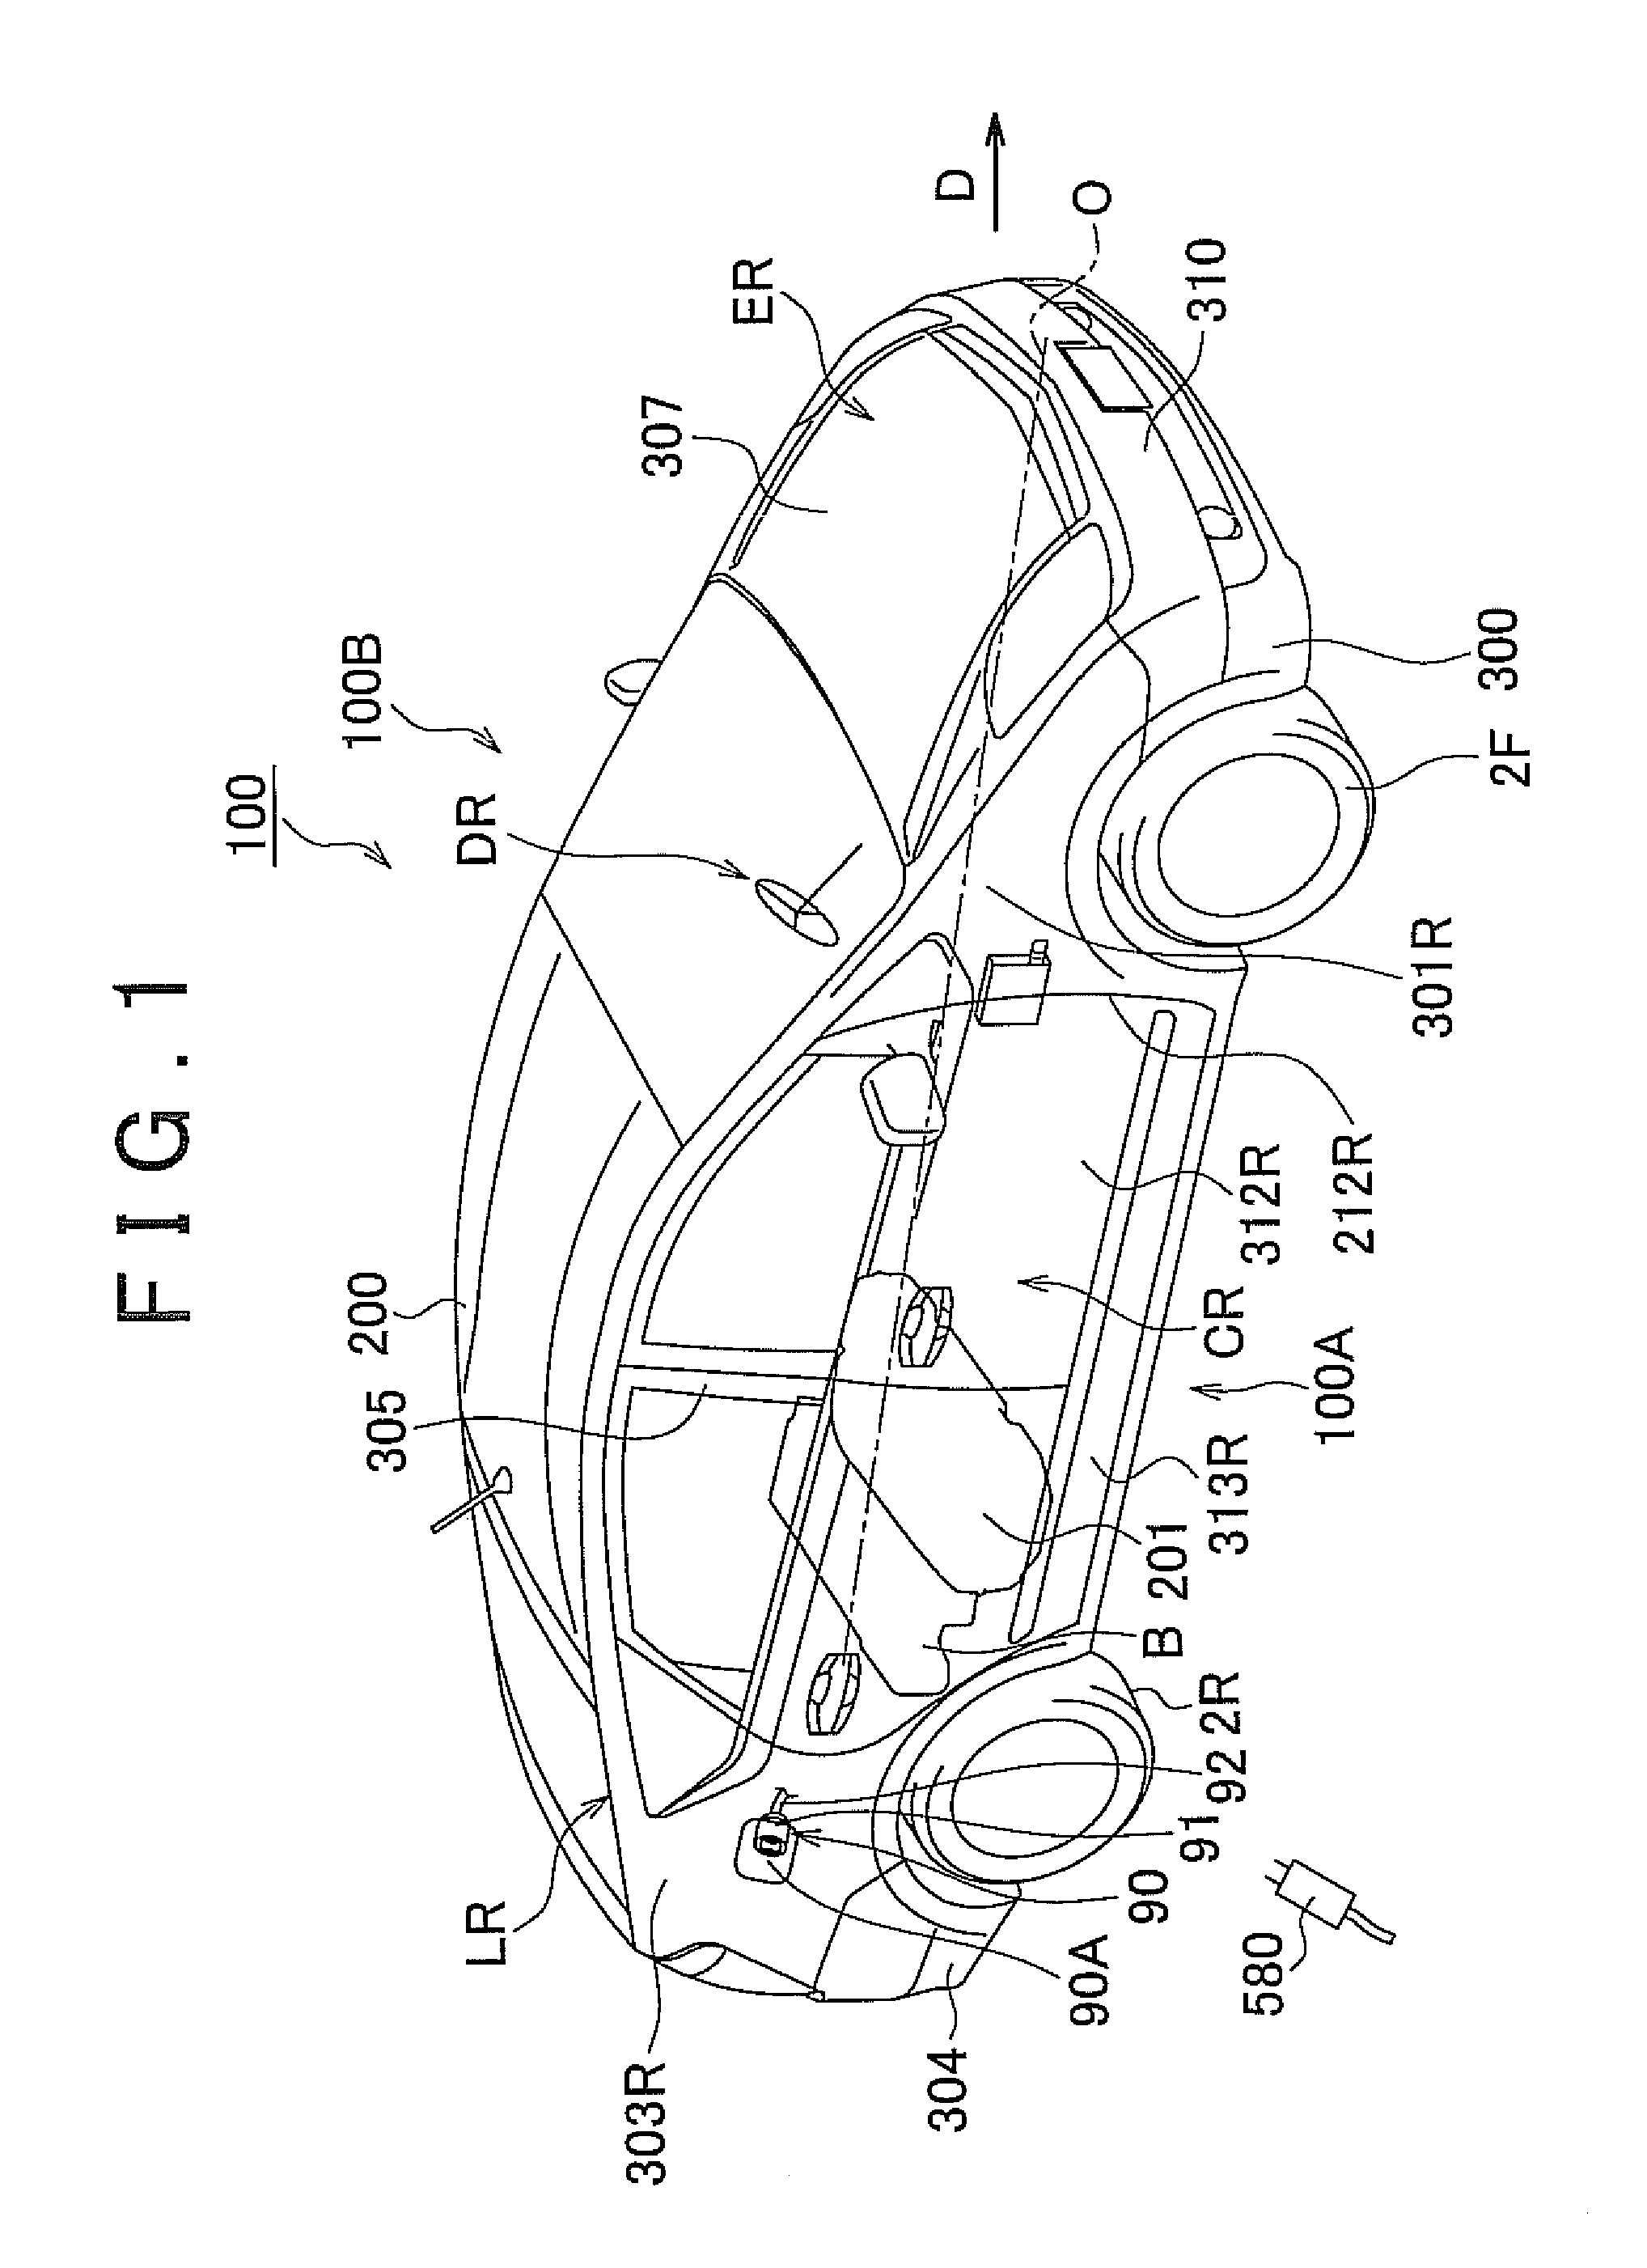 Vehicle, electrical charging apparatus, and control method